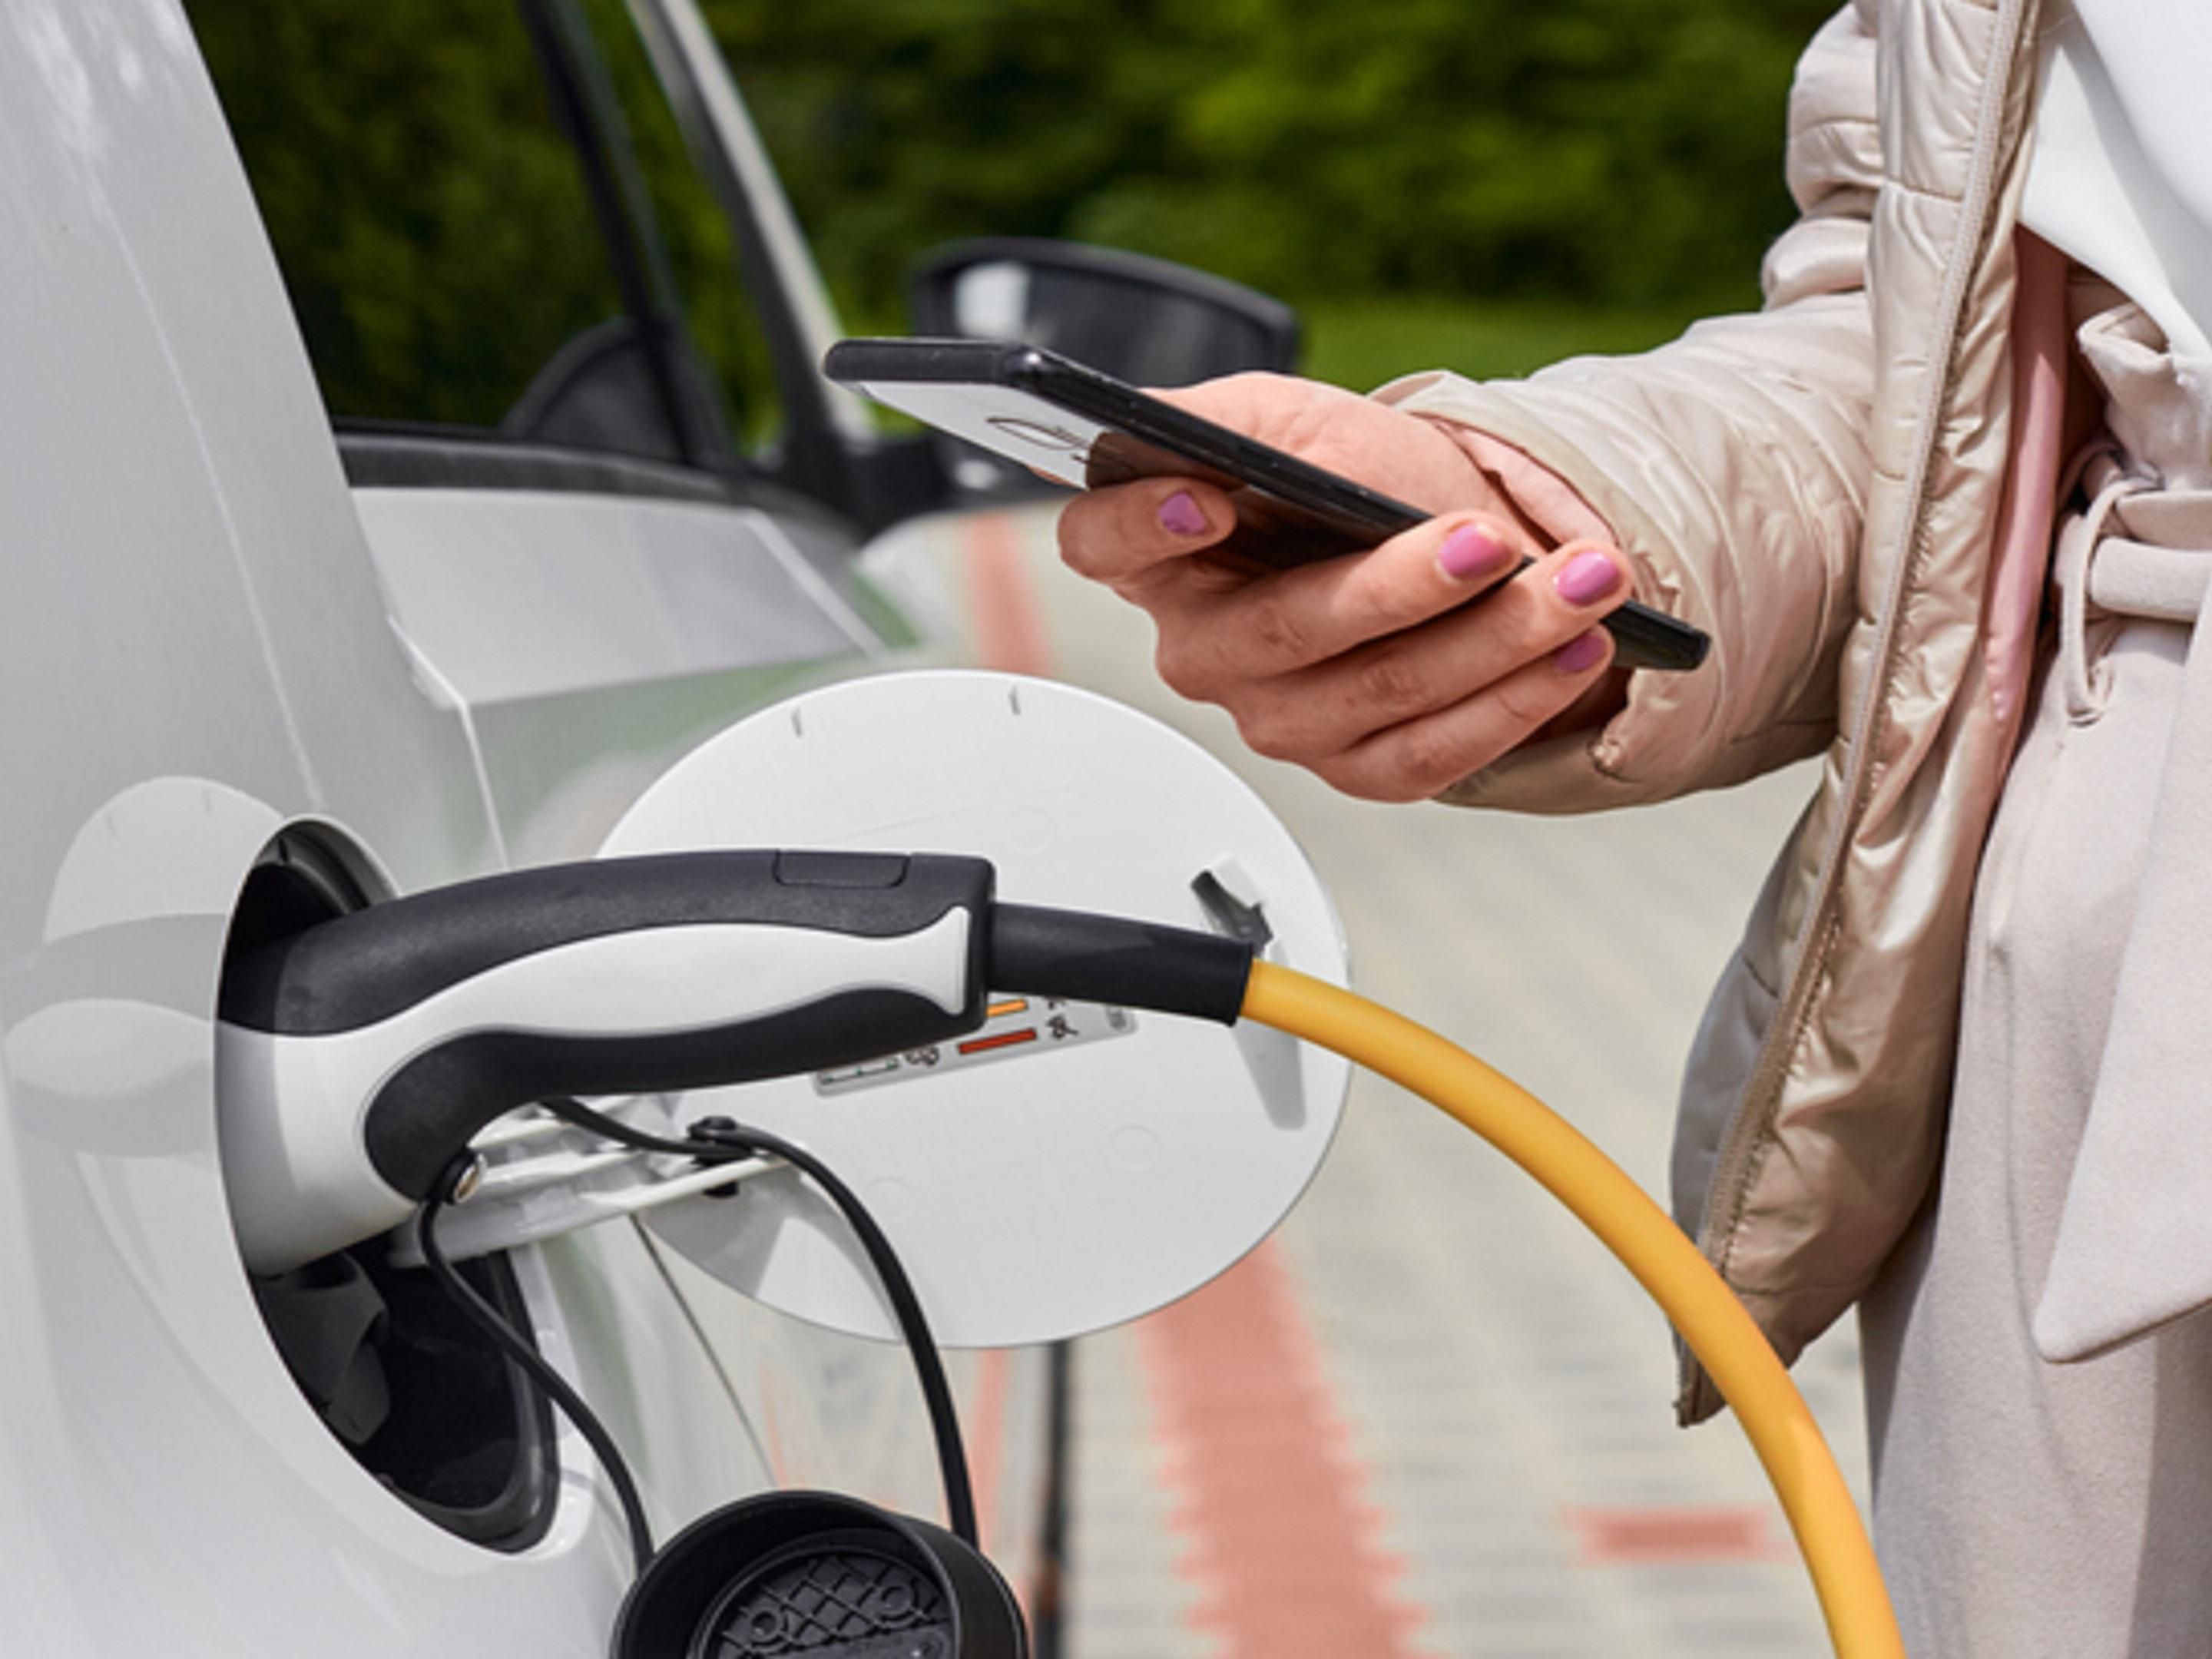 If you drive an electric vehicle, visit one of our convenient electronic charging stations during your stay. Charge is $3 per hour.